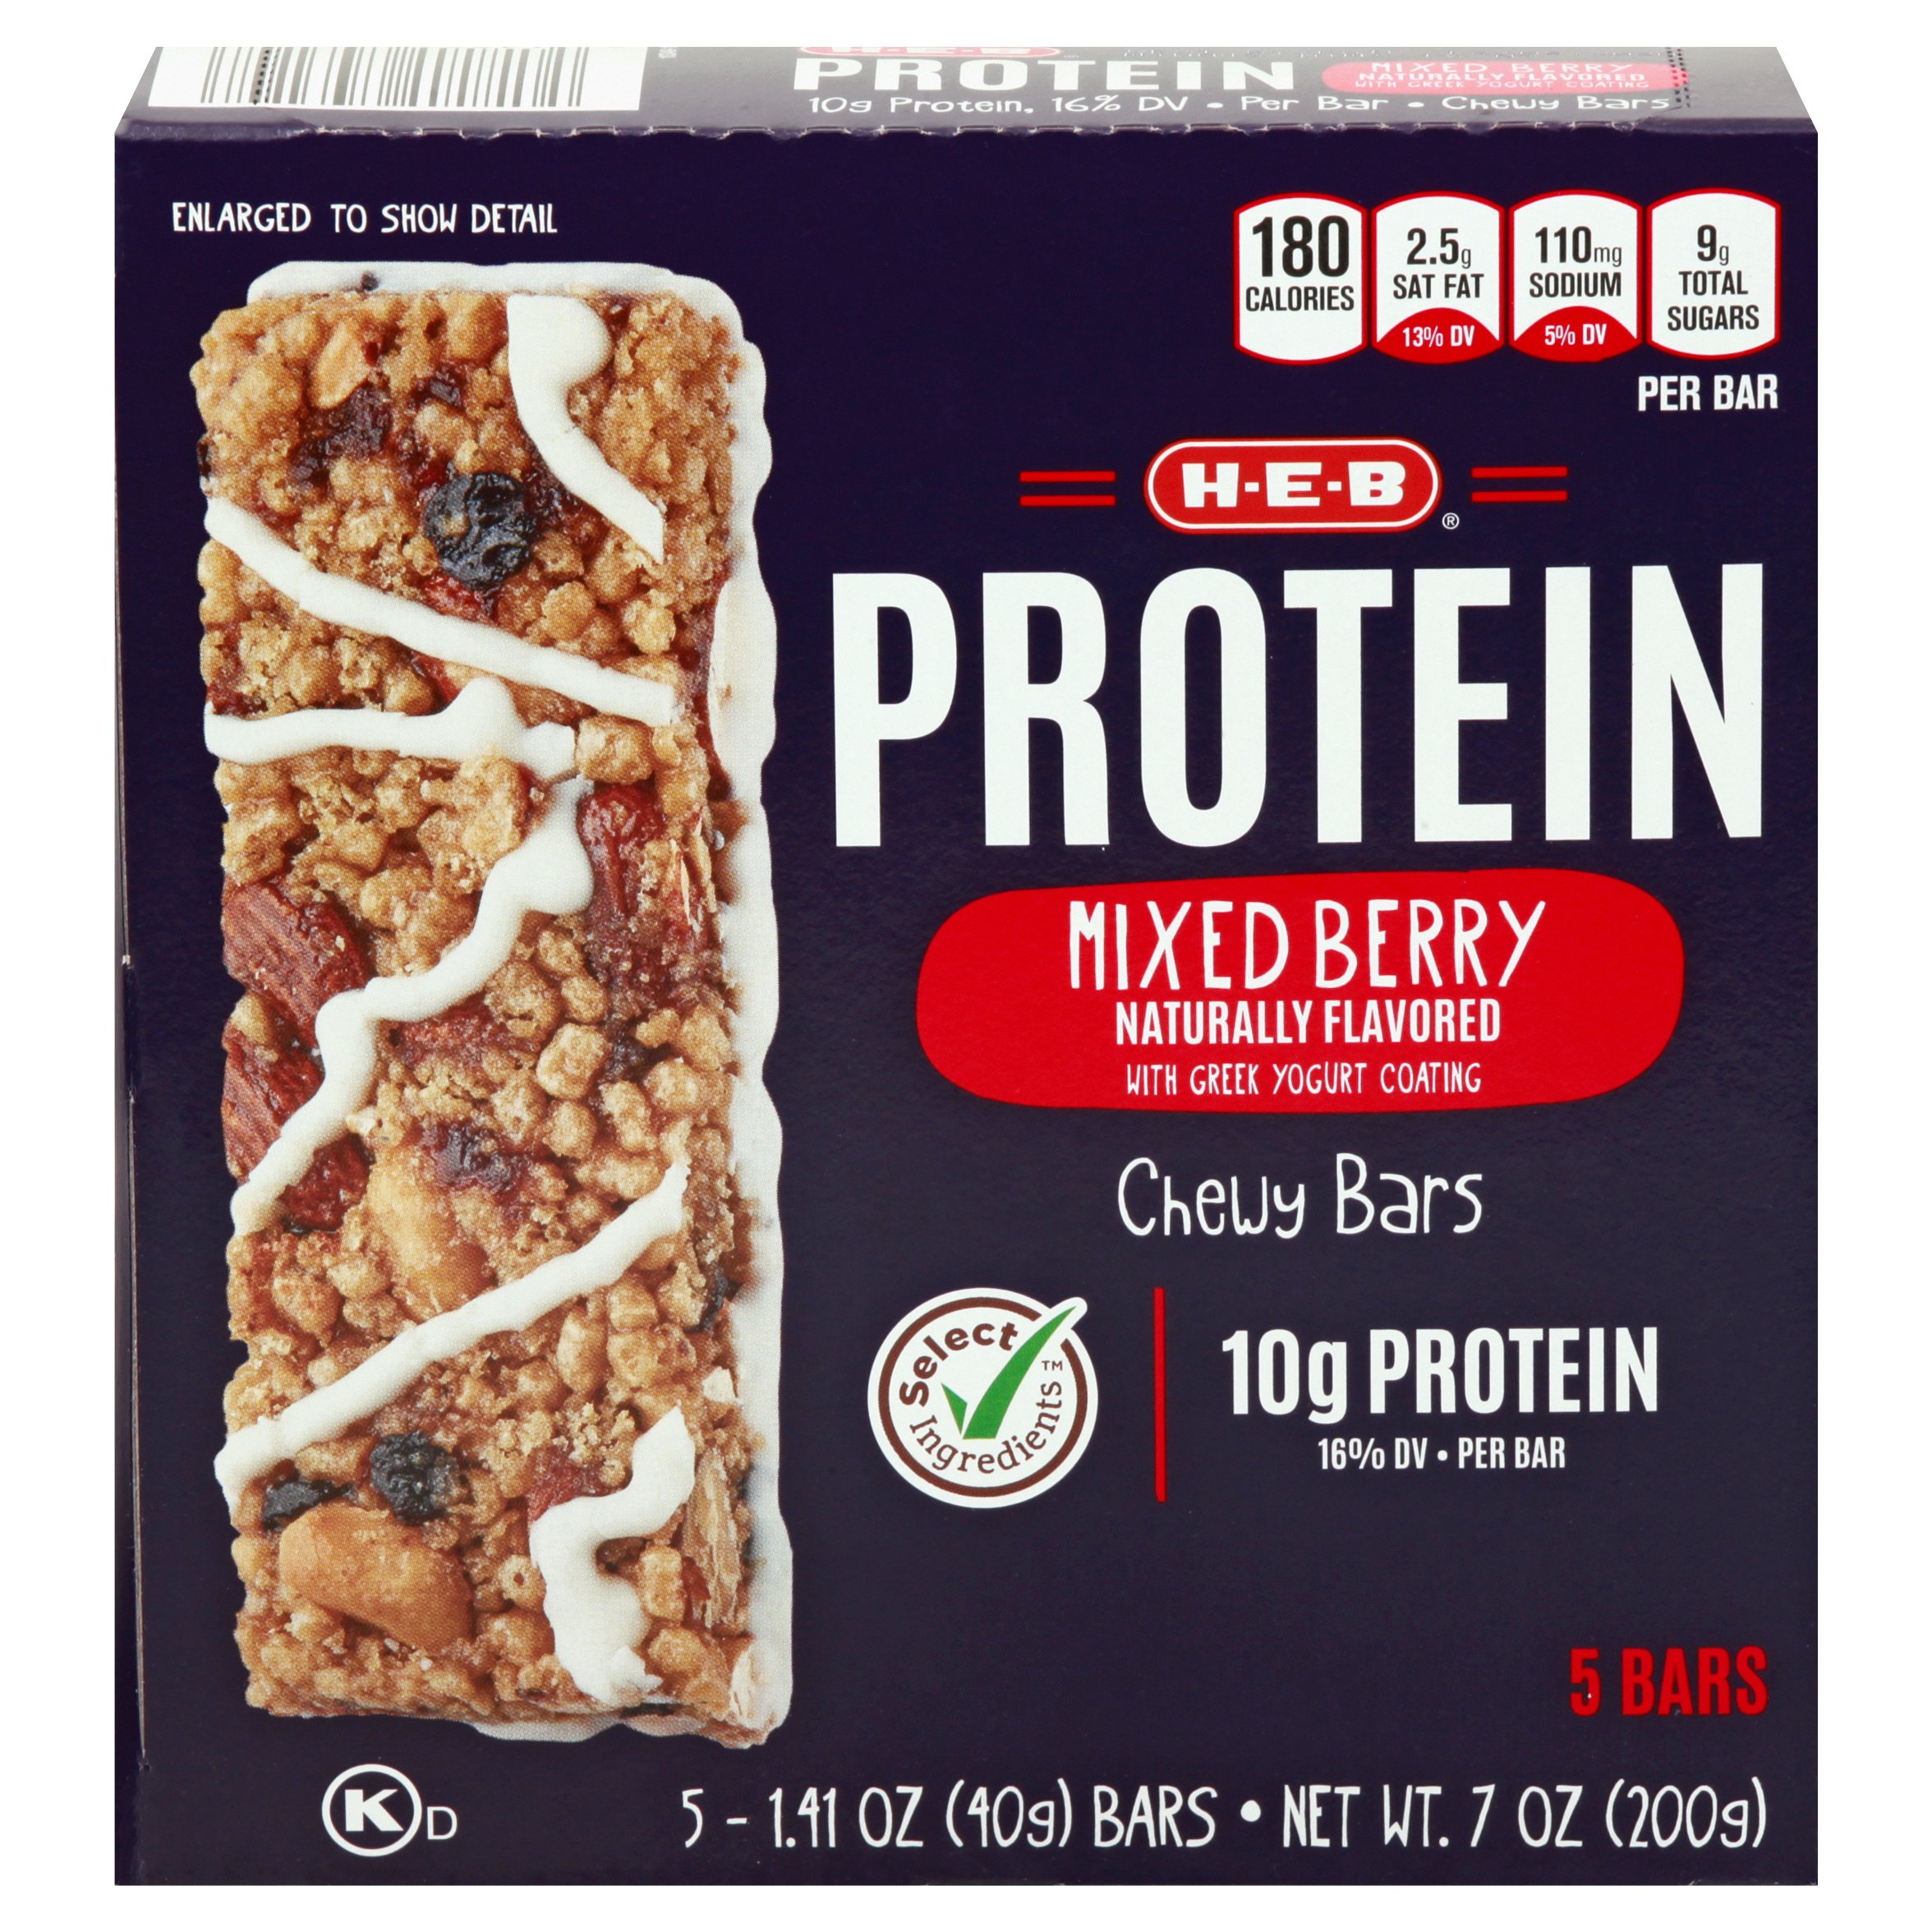 Rocka Nutrition makes it seven flavors for No Whey Bar in Butter